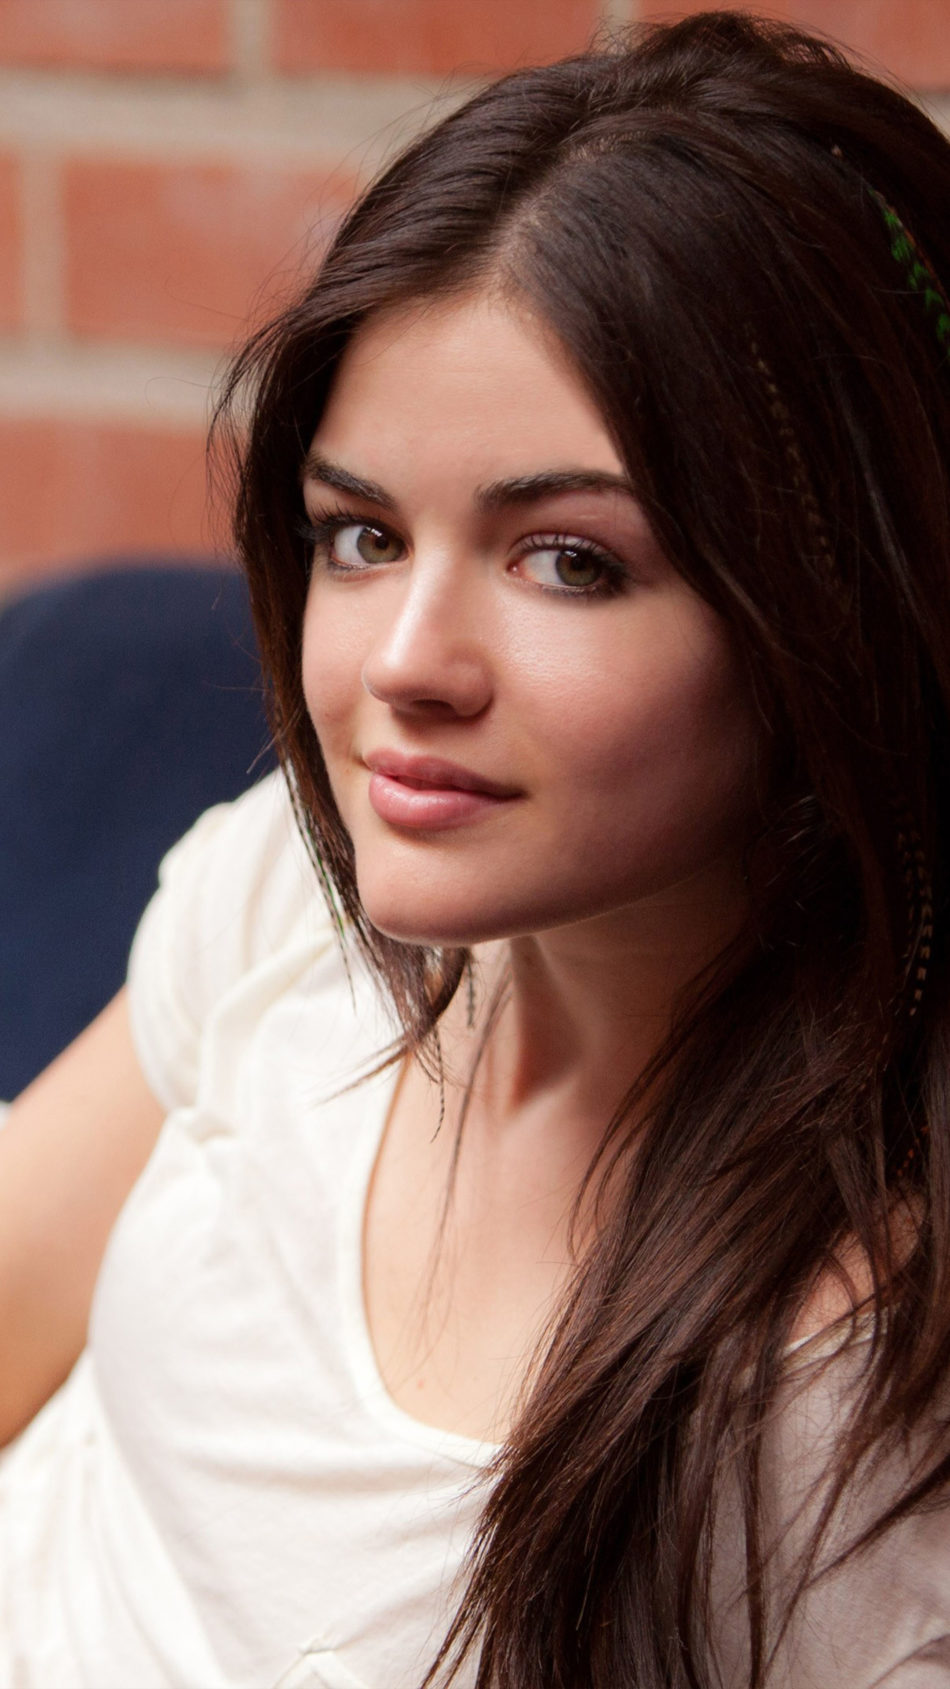 Lucy Hale Simple Photoshoot 4K Ultra HD Mobile Wallpaper